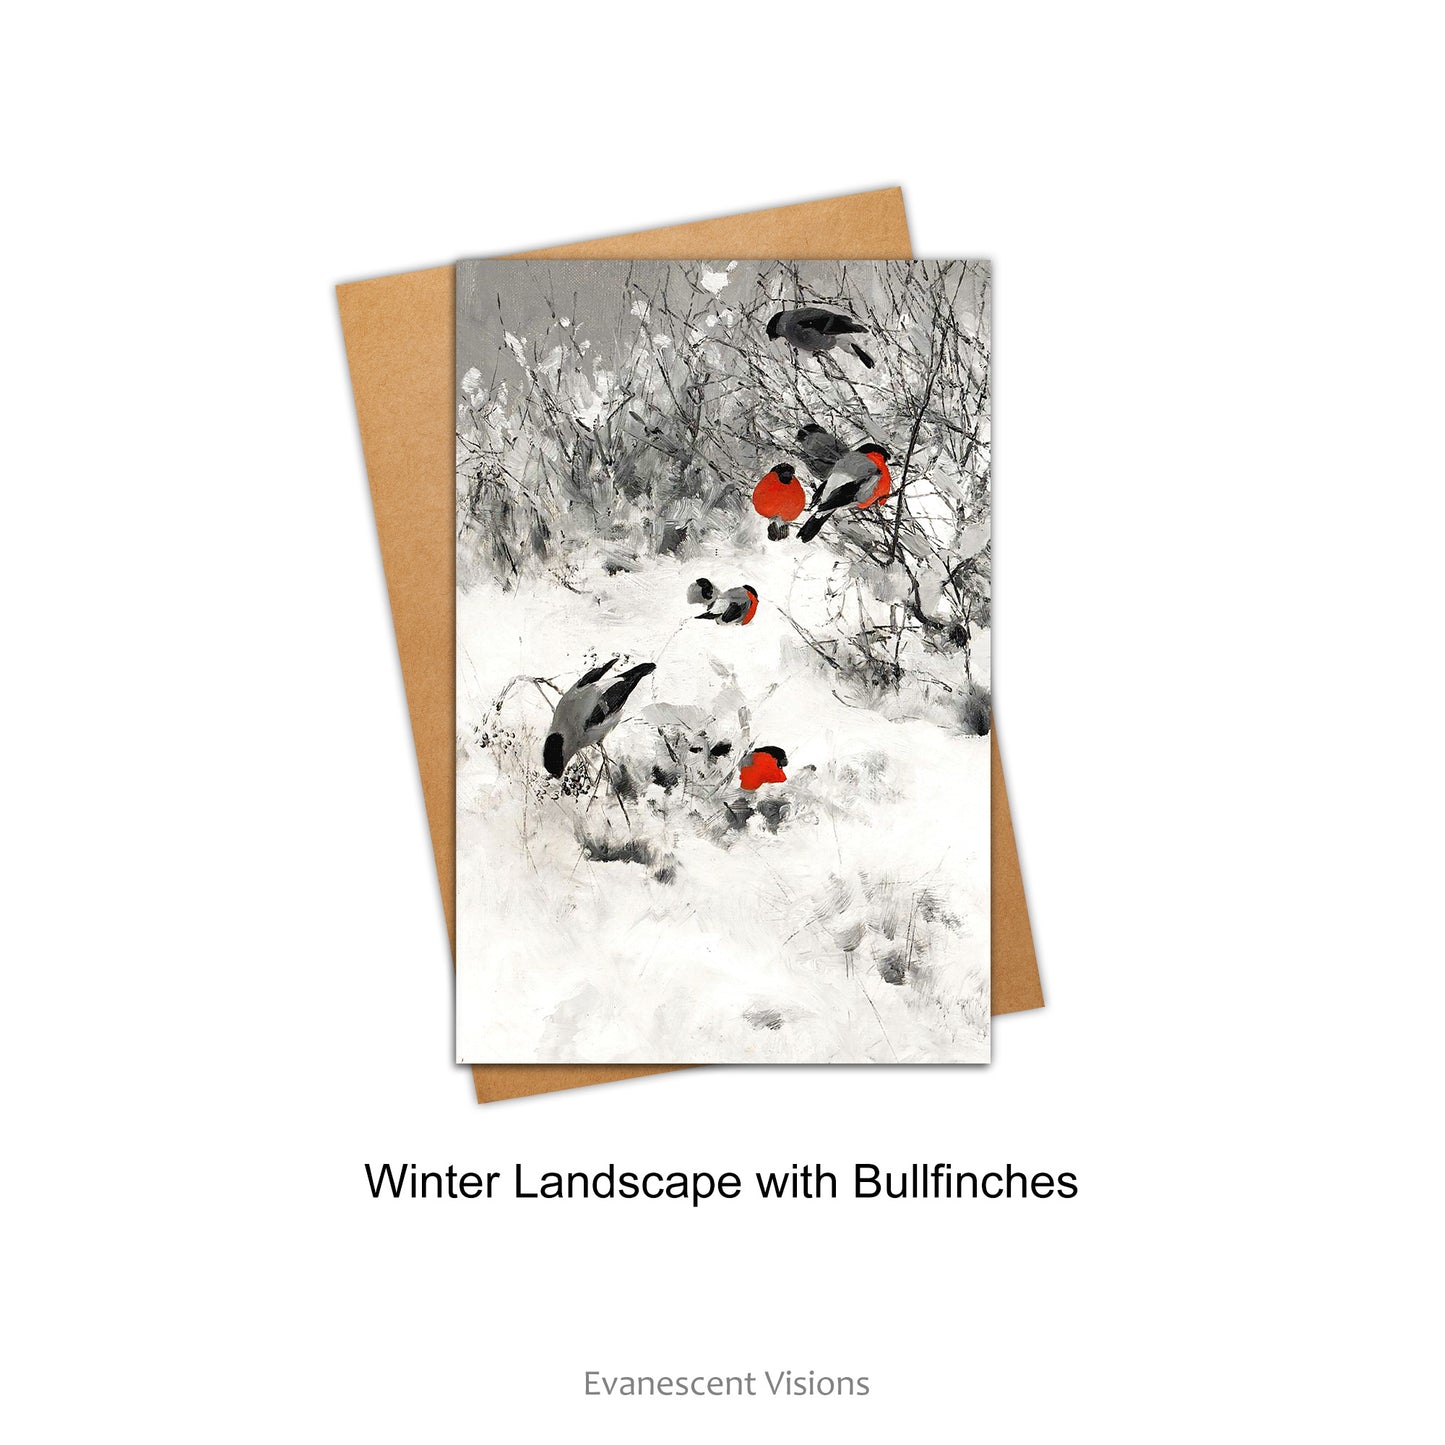 Snowy Winter Scenes Art Card with Winter Landscape with Bullfinches artwork by Bruno Liljefors